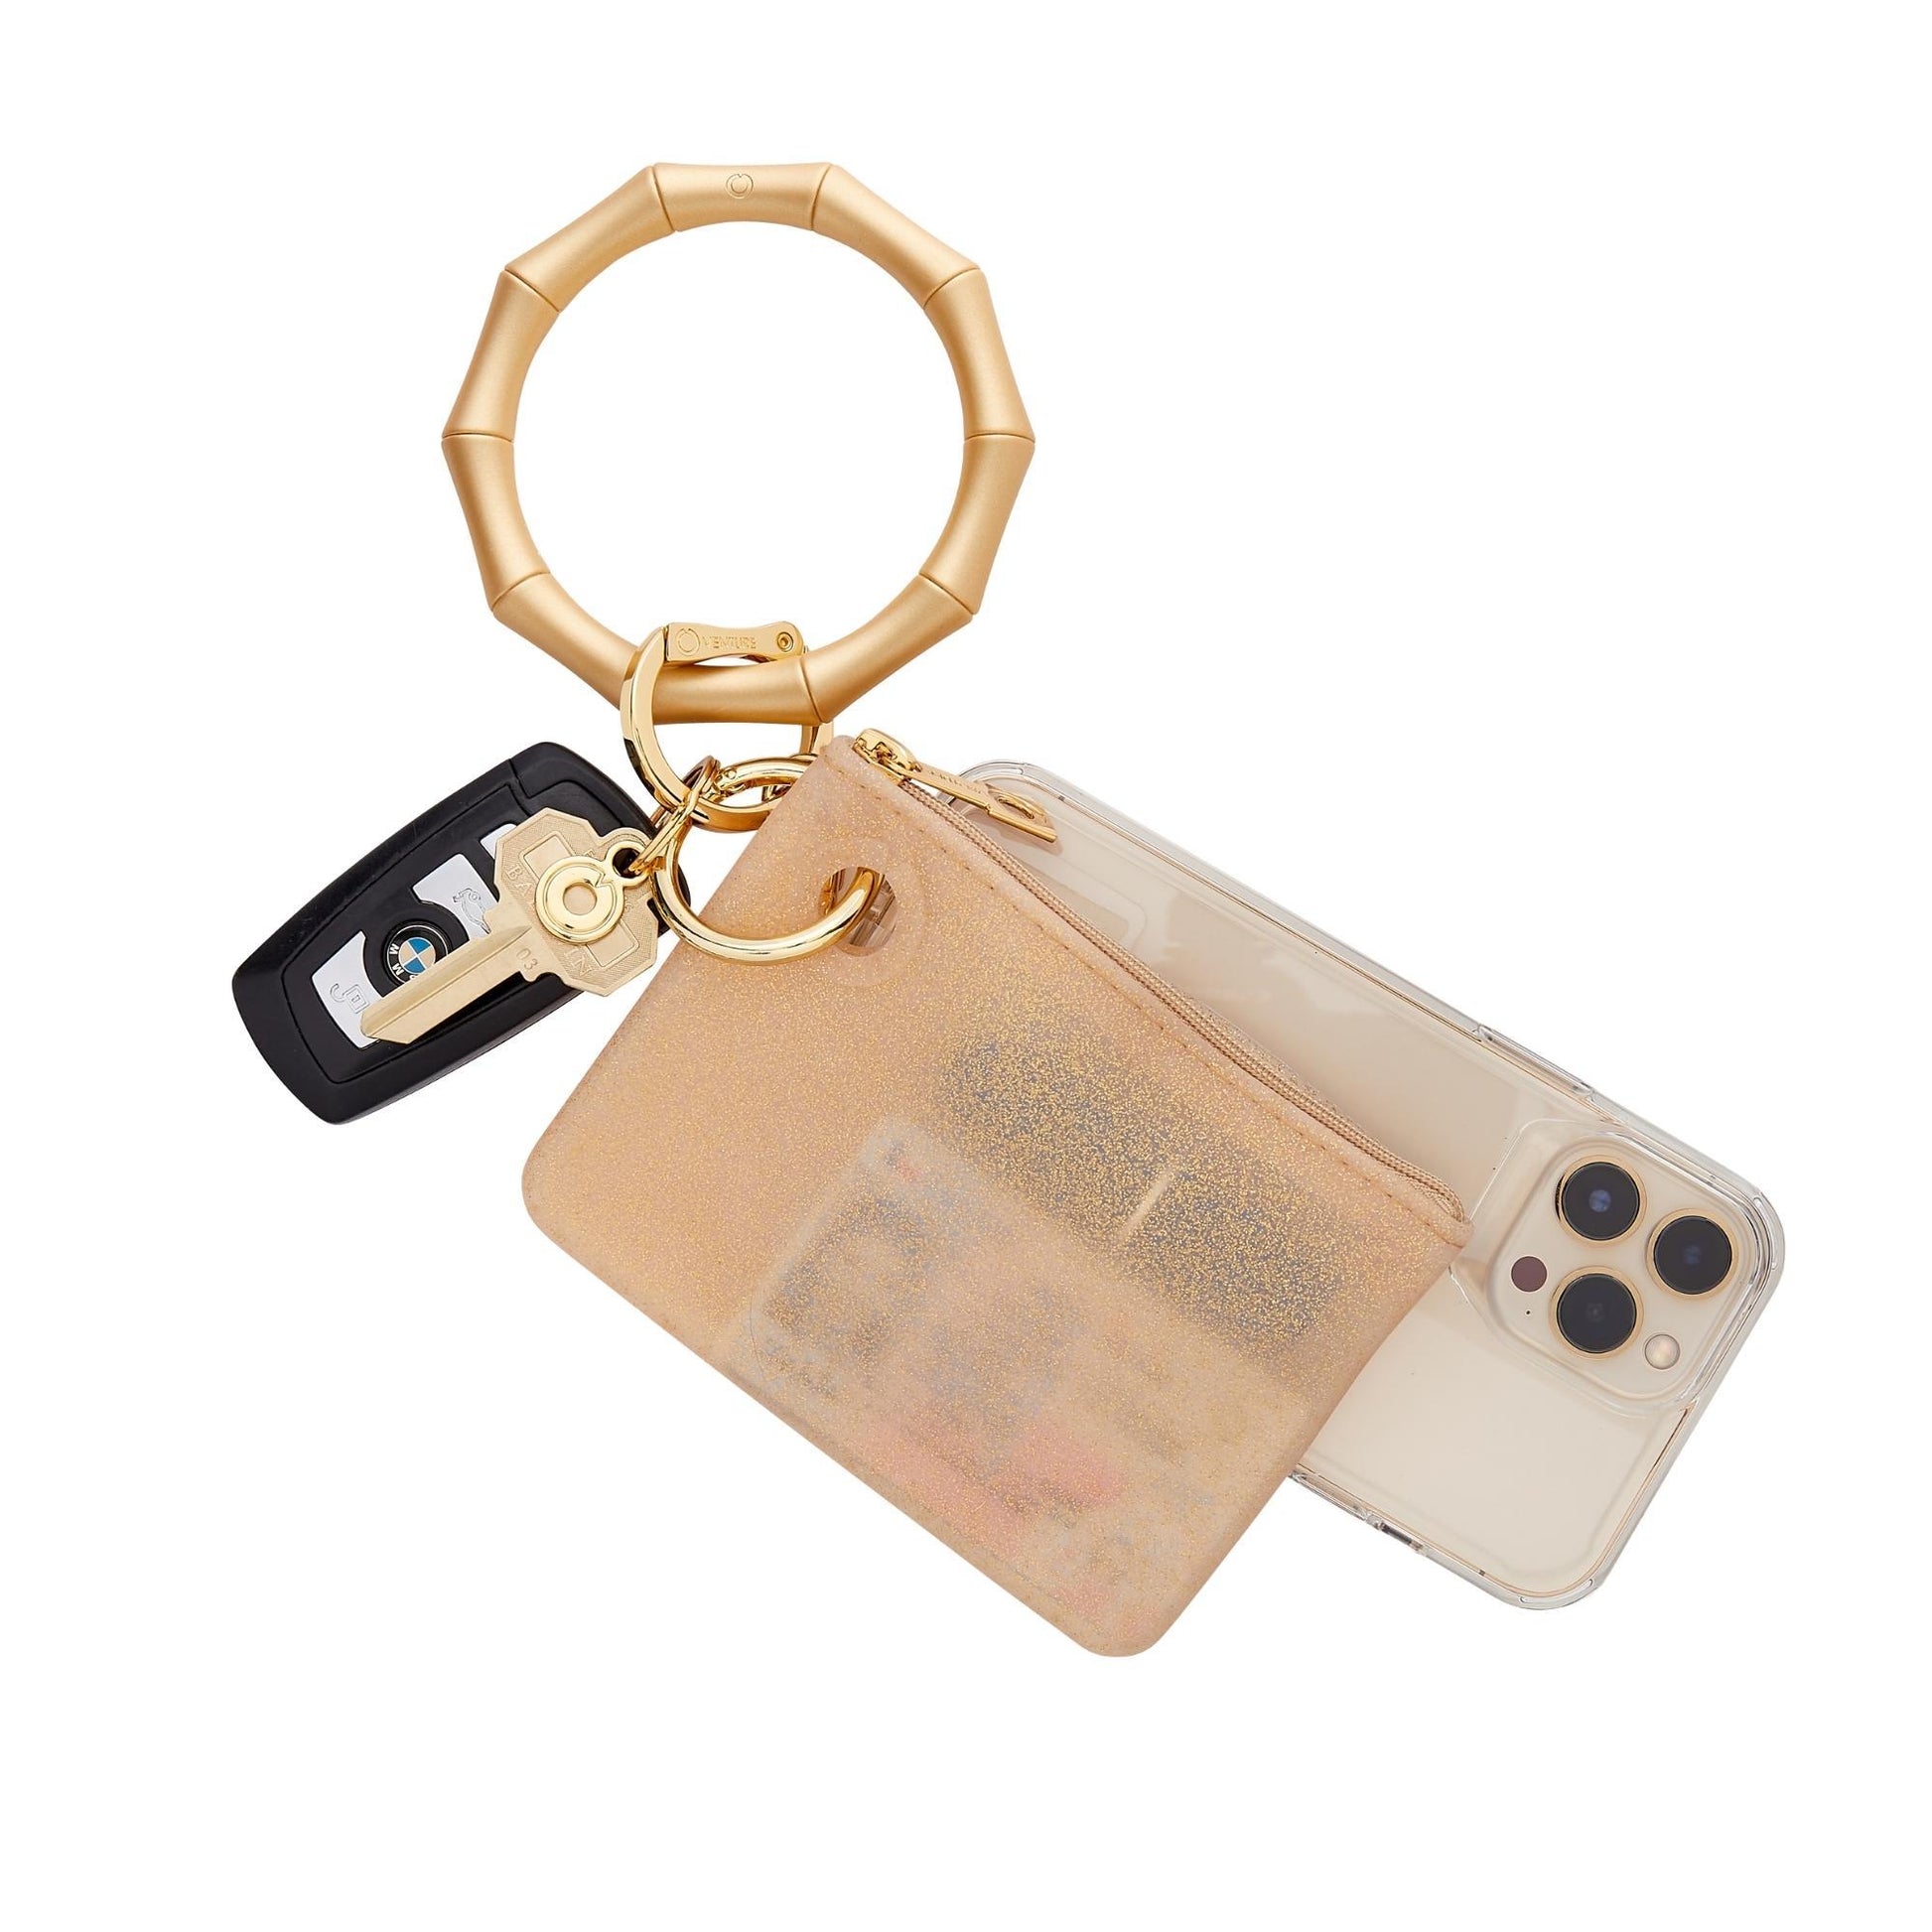 Gold Rush - The Hook Me Up™ Universal Phone Connector - Oventure shown attached to the gold silicone bamboo key ring and mini silicone pouch.